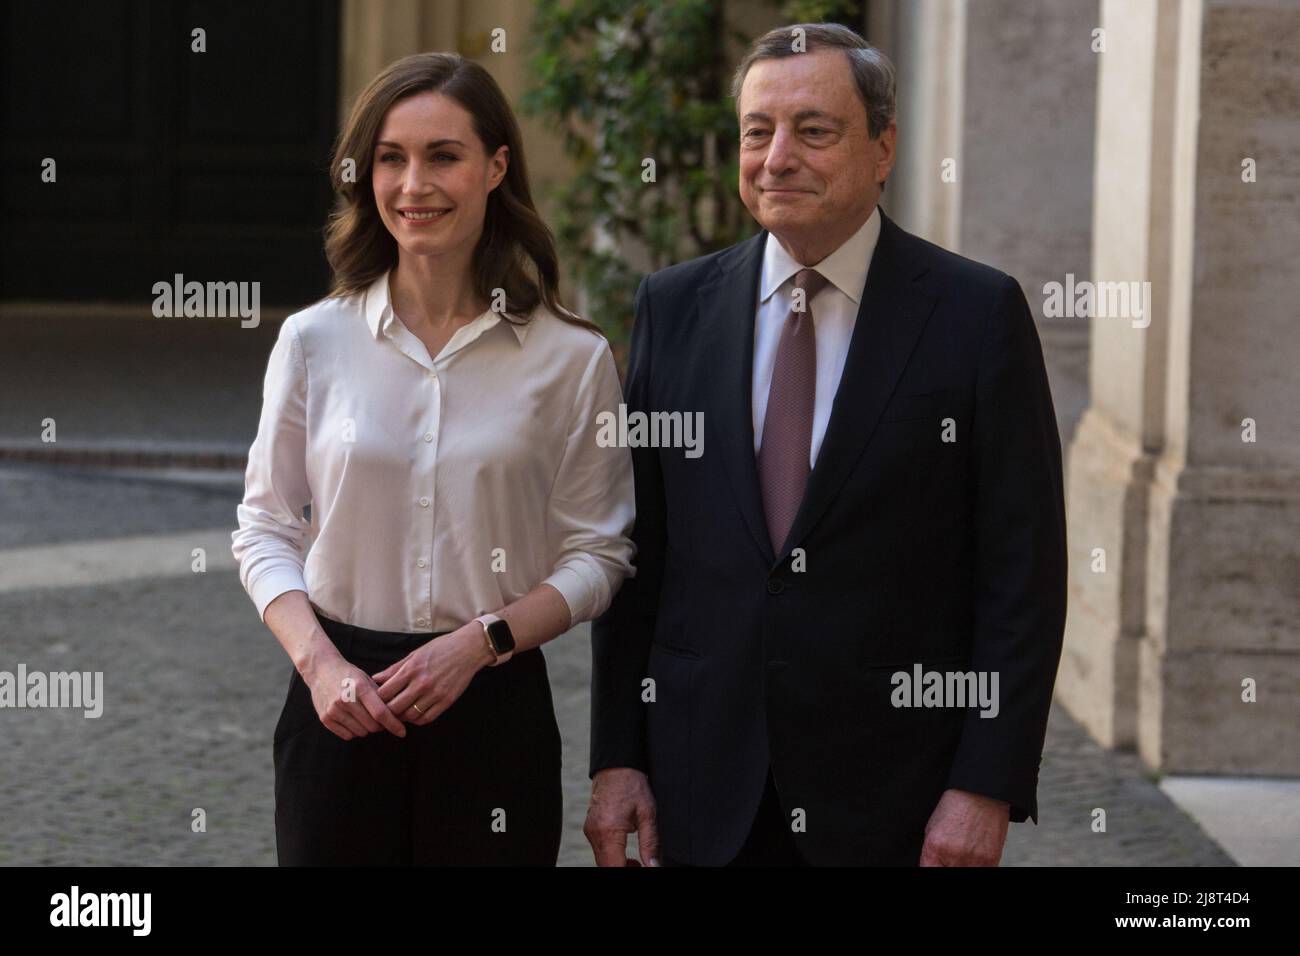 Rome, Italy. 18th May, 2022. The Italian Prime Minister Mario Draghi meets the Prime Minister of Finland Sanna Marin At Palazzo Chigi. Today, Finland, along with Sweden, has formally applied to join NATO, which Italy is already part of. Credit: LSF Photo/Alamy Live News Stock Photo